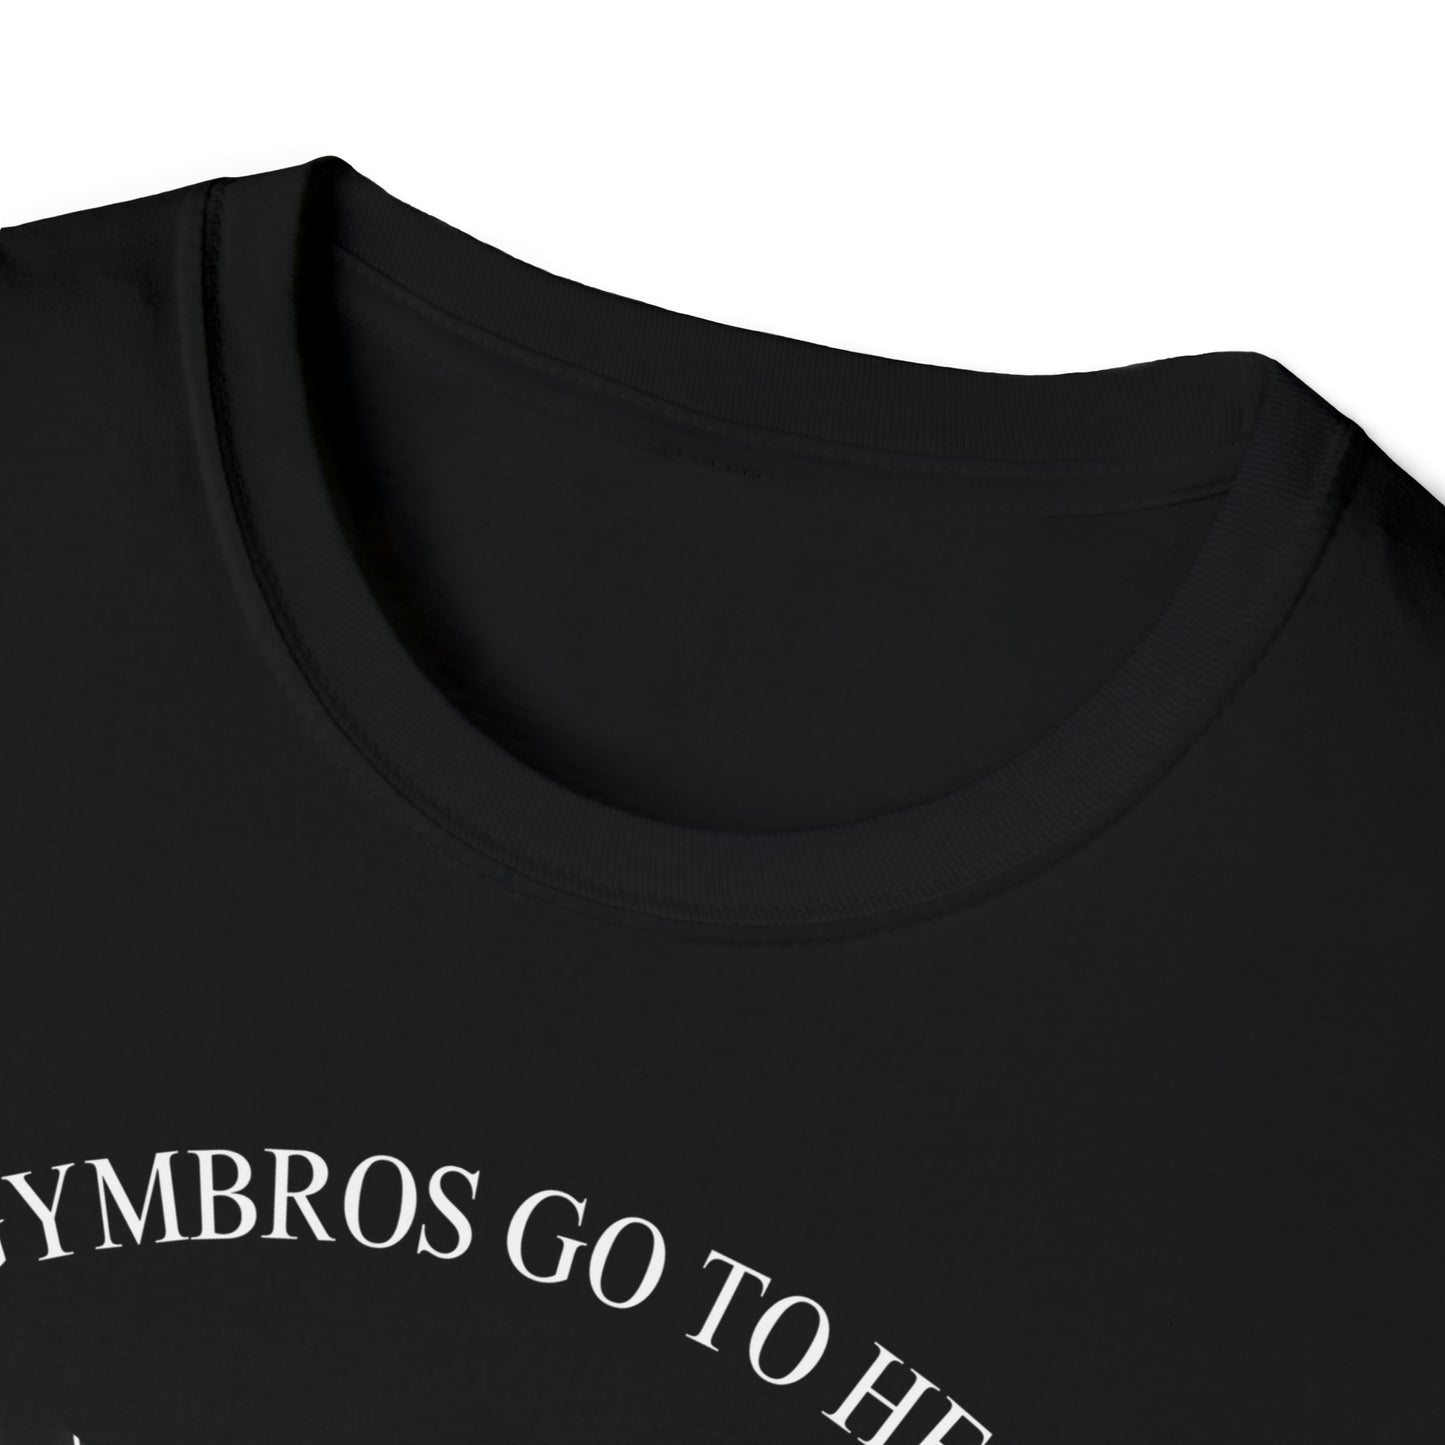 All Gymbros Go To Heaven Unisex Softstyle T-Shirt